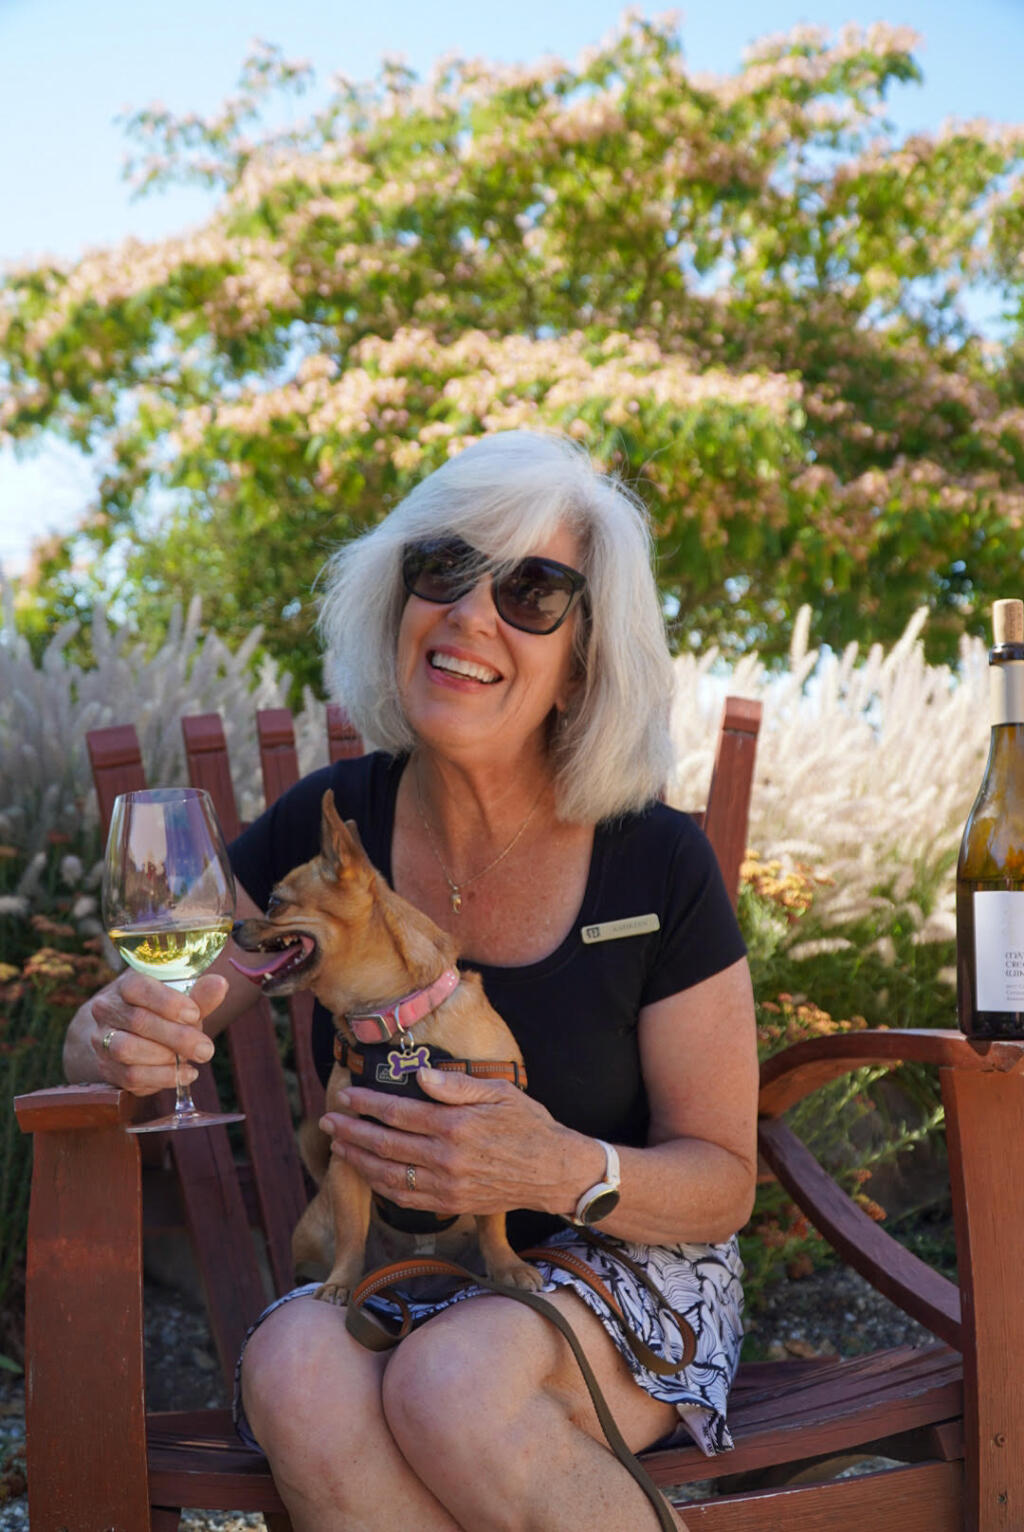 Kathleen Daly is a tasting room associate at Matanzas Creek Winery and a wine enthusiast who has four rescue dogs. “Everyone who’s ever loved a dog knows how special it is to share leisure time with their best friend,” she said. “What dog lovers and wine lovers have in common is great taste. Dogs have been cherished by nobles and rulers for thousands of years. Fine wines and dogs have been celebrated by many ancient civilizations and some things never change.” (Sophia Paganini)